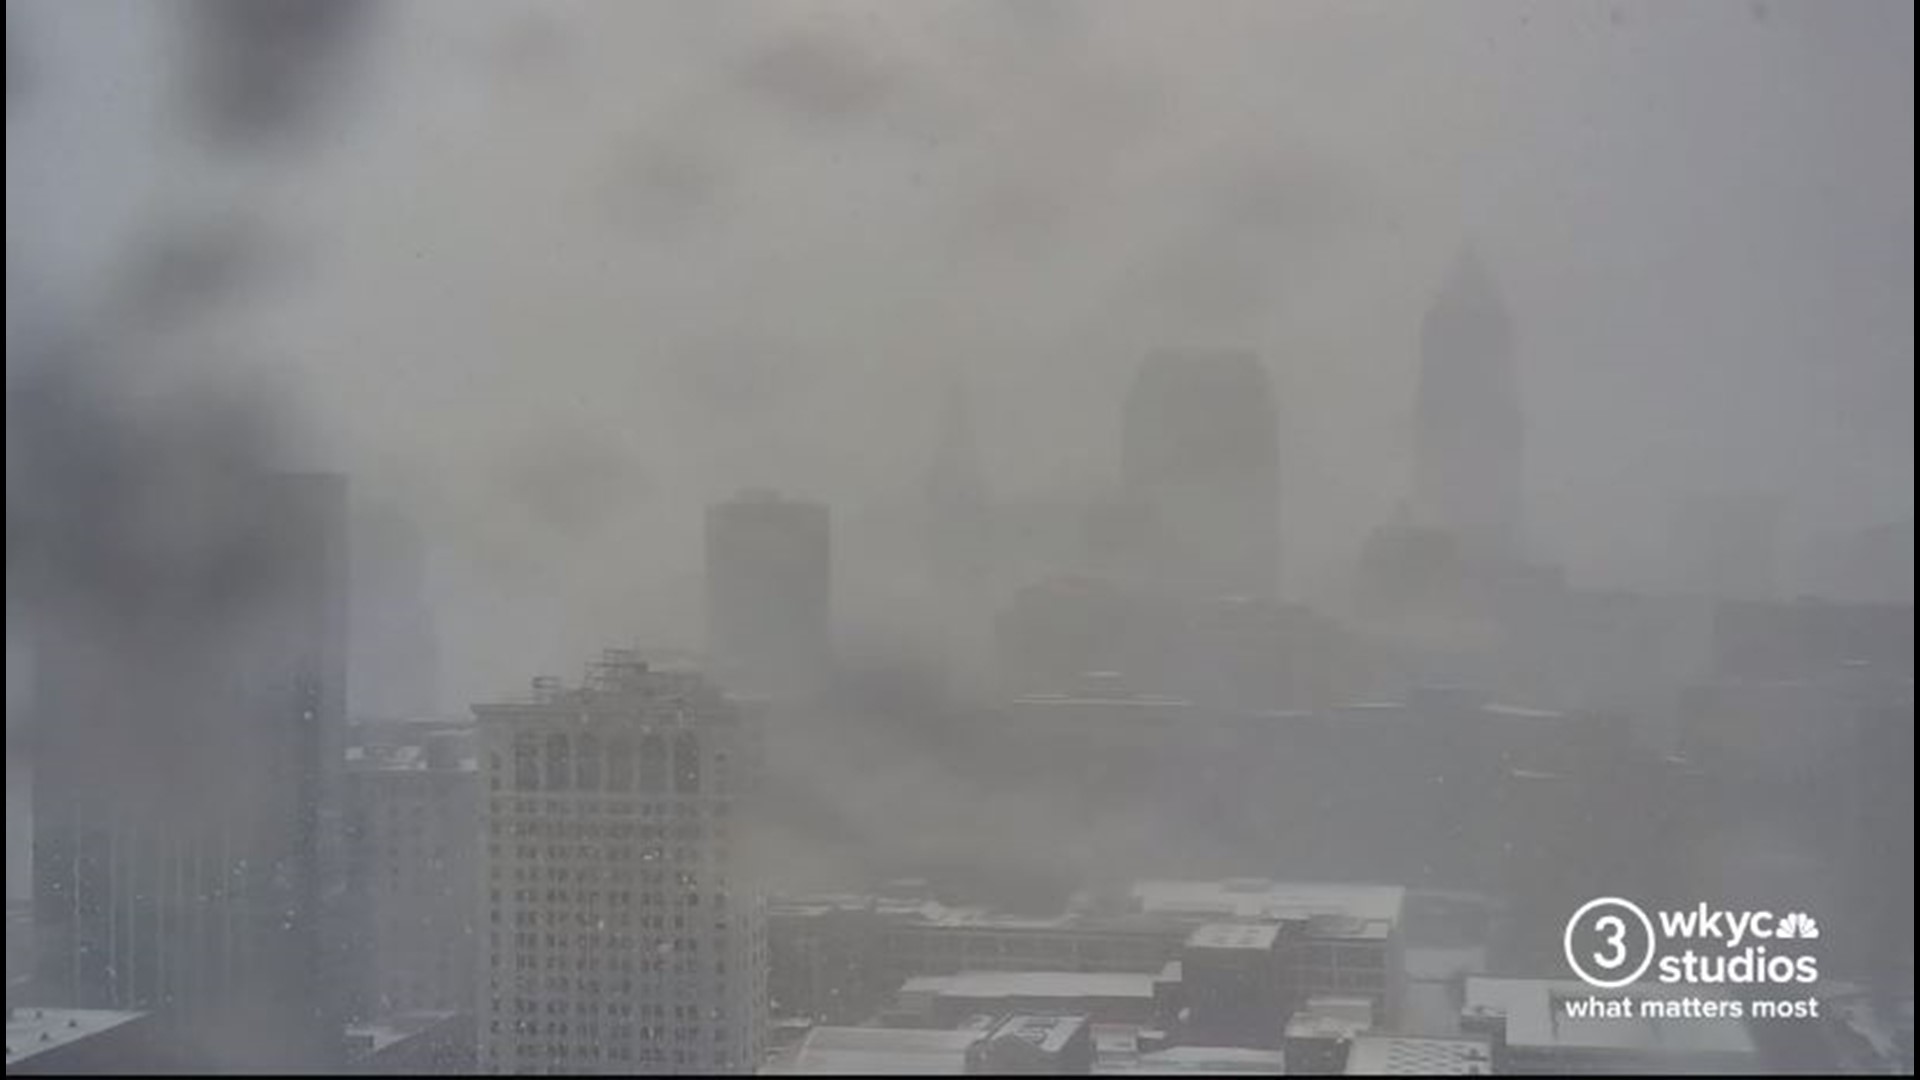 Downtown Cleveland is dealing with some lake effect snow this morning. Here's video from a Cleveland skyline camera that shows the snow moving through the city.